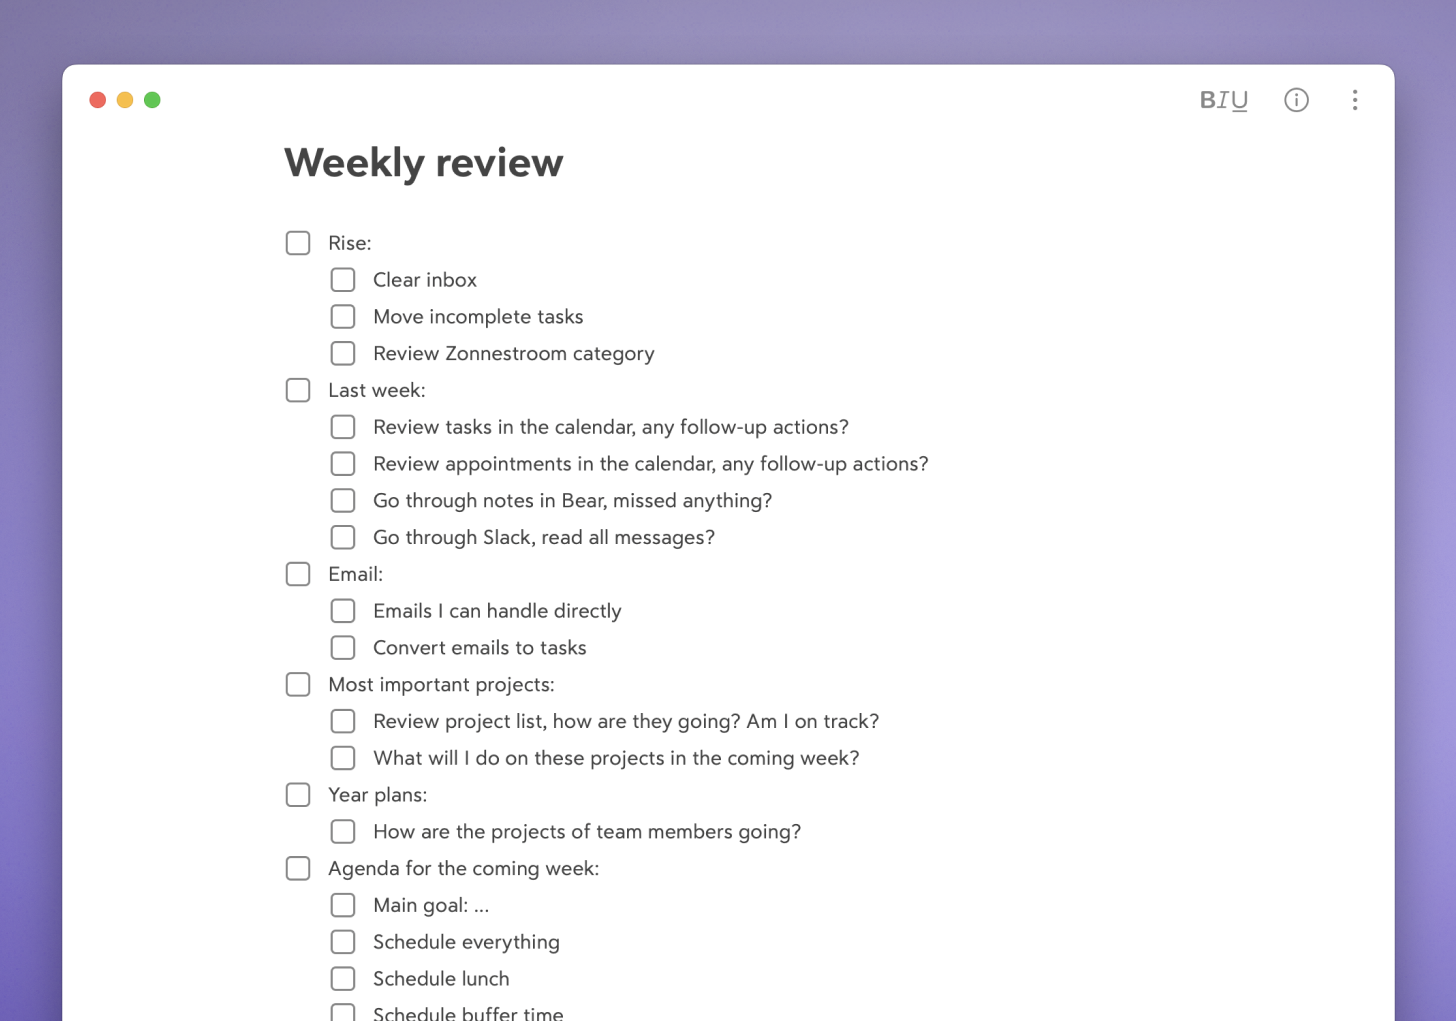 The Weekly Review Checklist from Derk